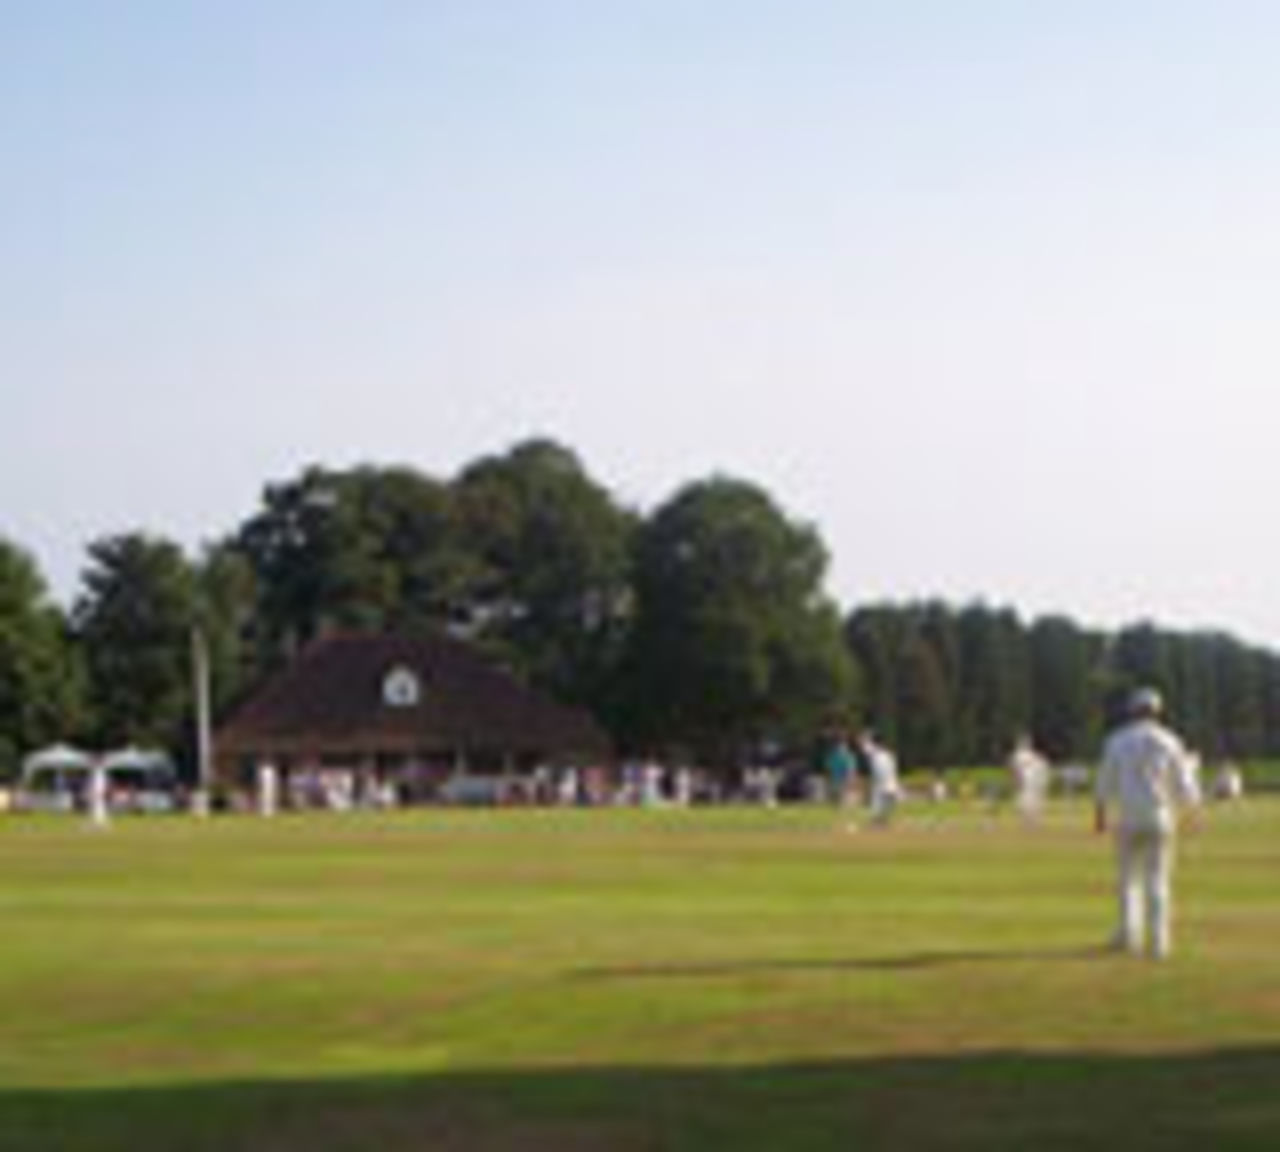 The Red Lions at Cuckfield Cricket Club, East Sussex, July 30 2004